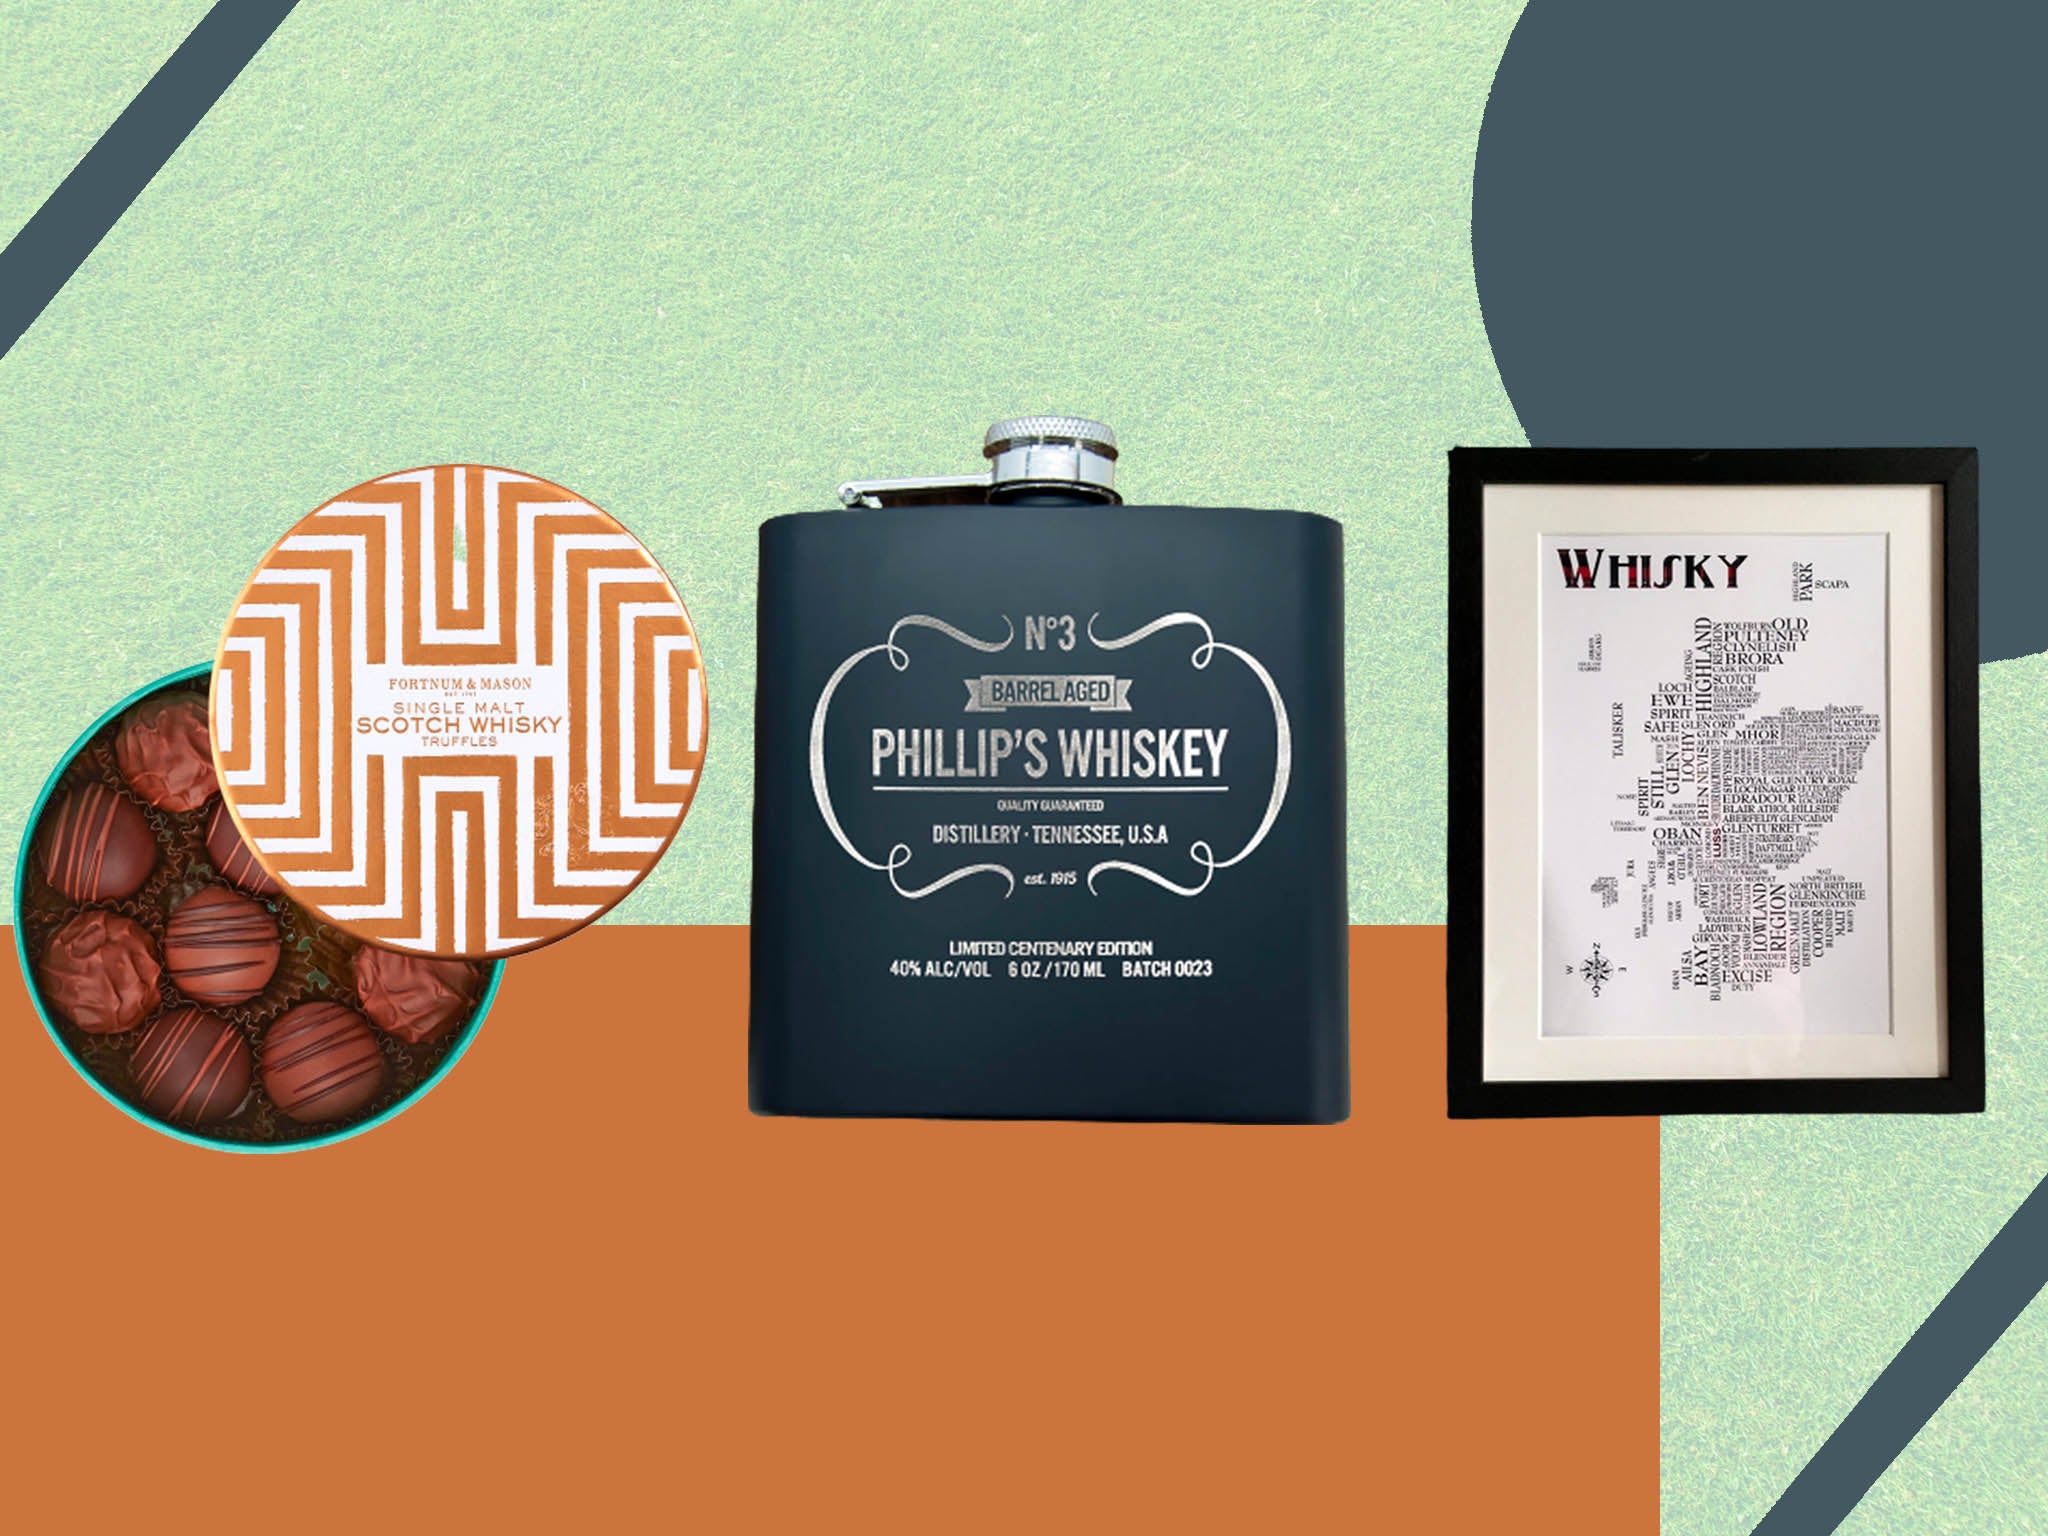 The Best Gifts for Whiskey Lovers